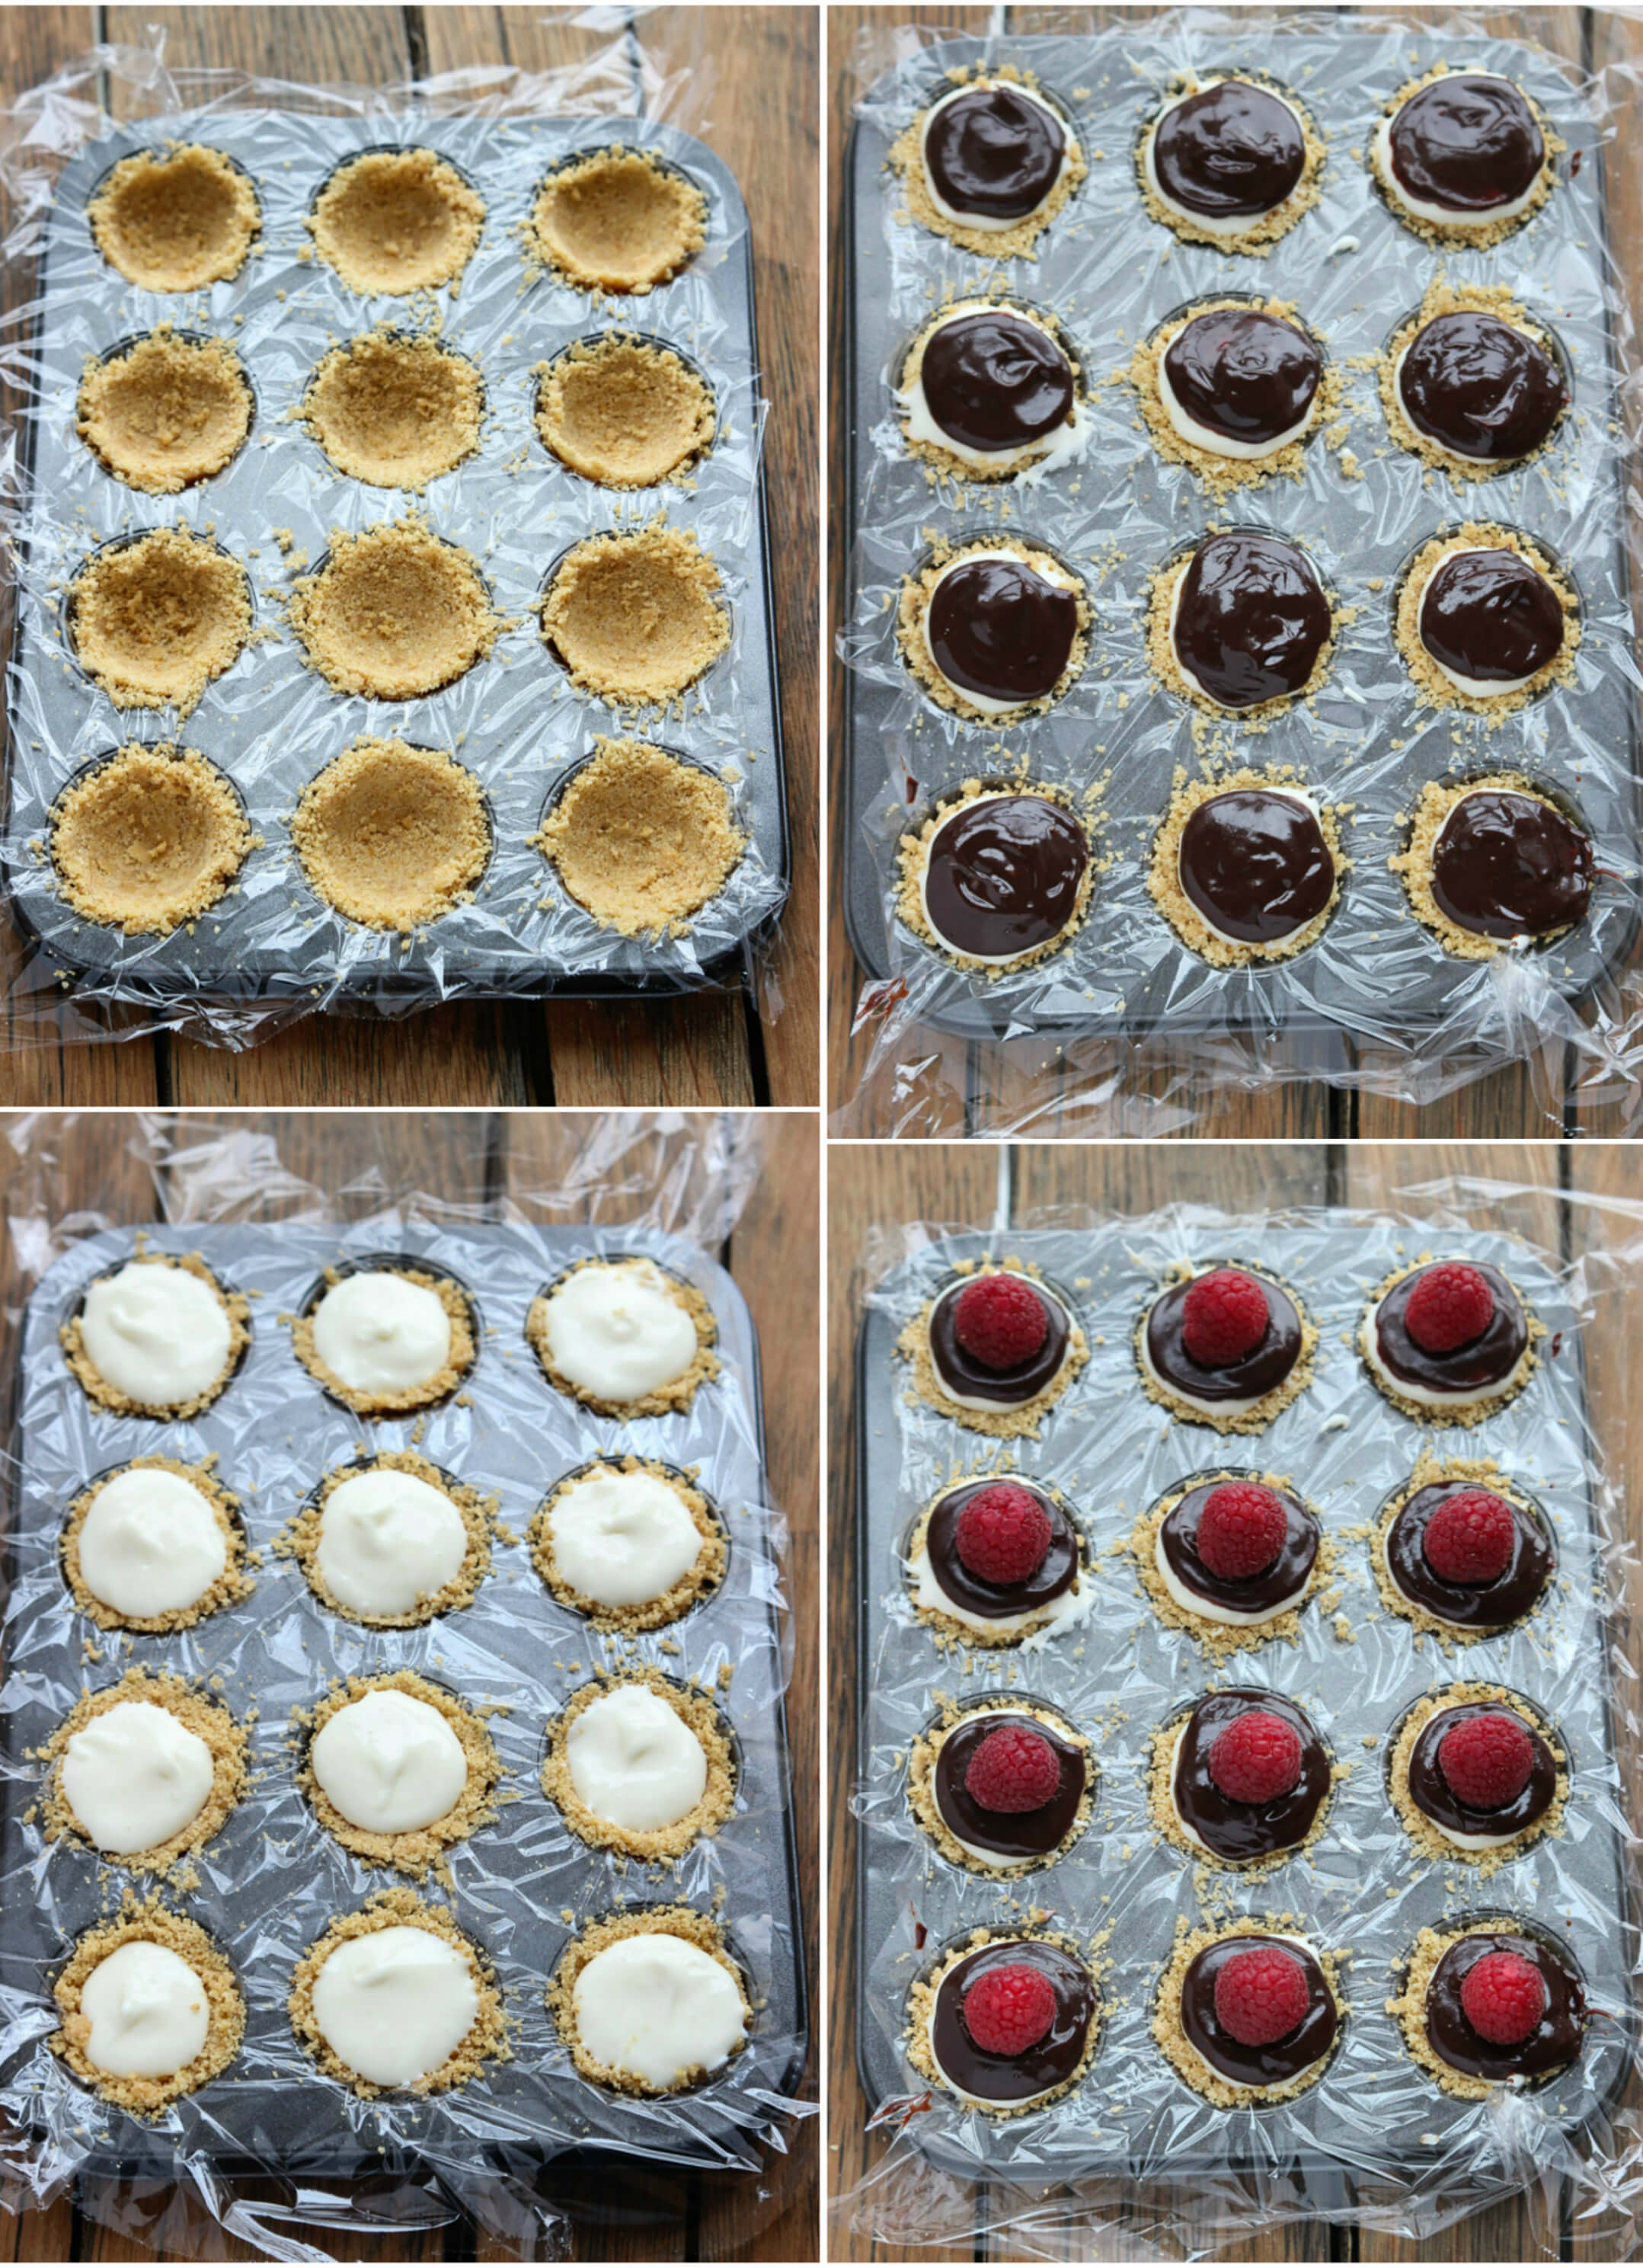 Super tasty, mini, and not to mention EASY dessert. Perfect for any party | littlebroken.com @littlebroken